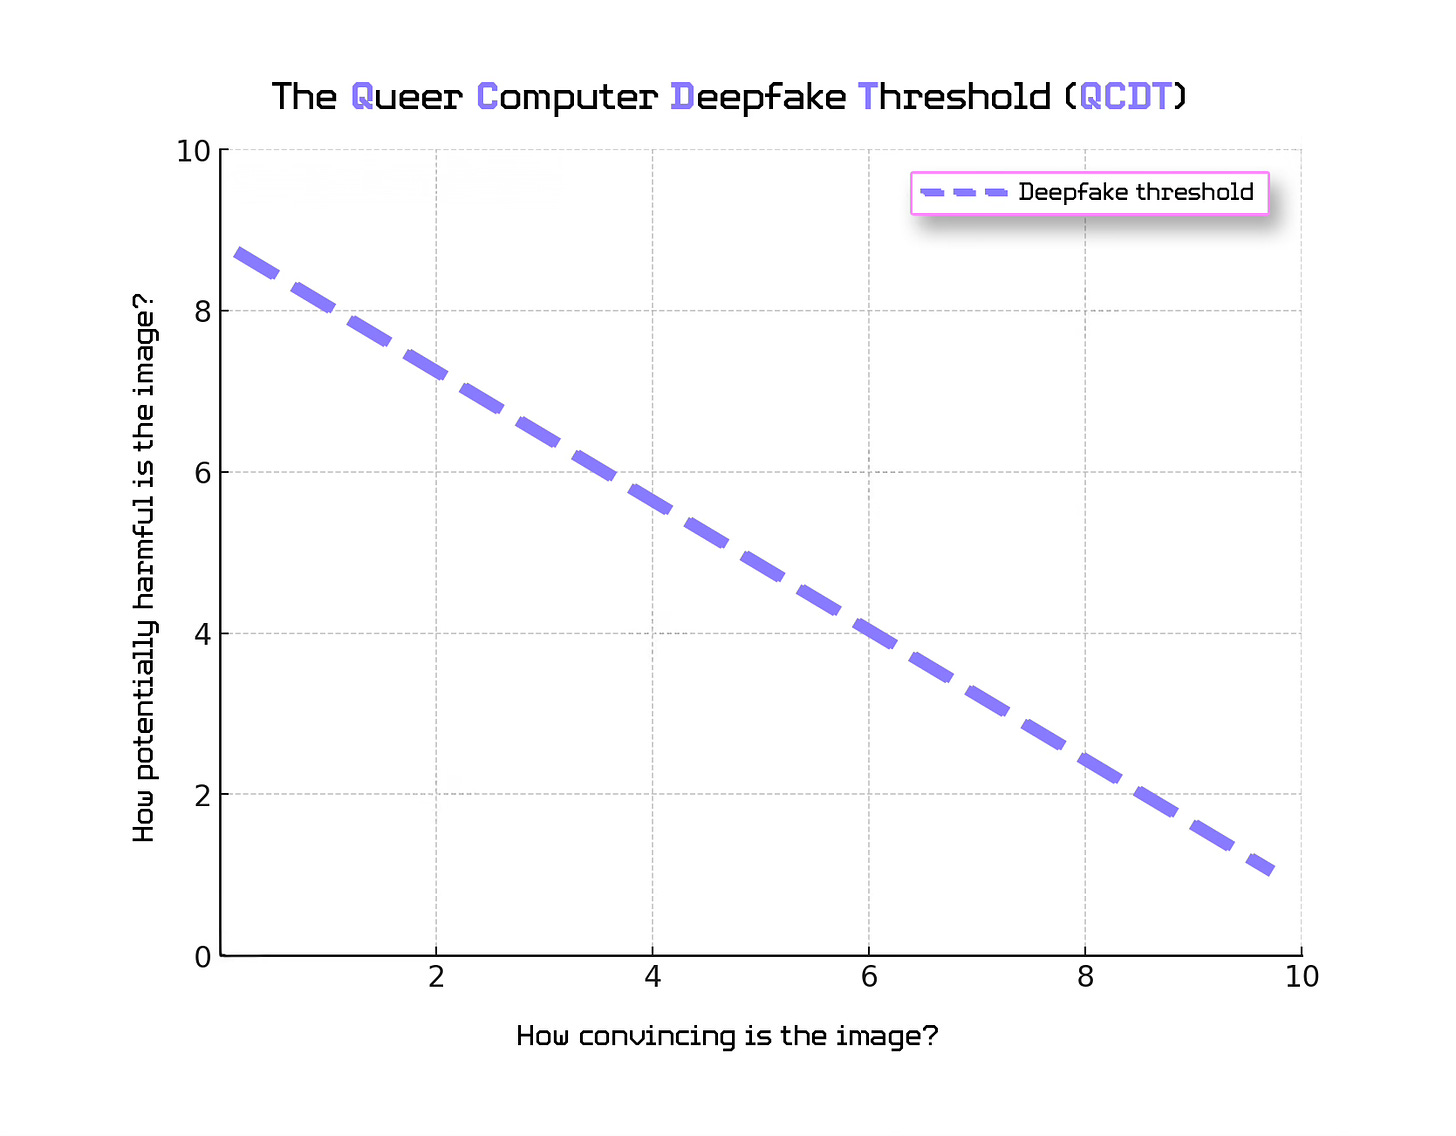 A graph titled 'The Queer Computer Deepfake Threshold (QCDT)' with a blue dashed diagonal line labeled 'Deepfake threshold' descending from the top left to the bottom right, indicating the boundary between non-deepfake and deepfake images. The X-axis is labeled 'How convincing is the image?' ranging from 0 to 10, and the Y-axis is labeled 'How potentially harmful is the image?' also ranging from 0 to 10. The graph does not contain any plotted points or additional information, presenting only the axes and the threshold line.